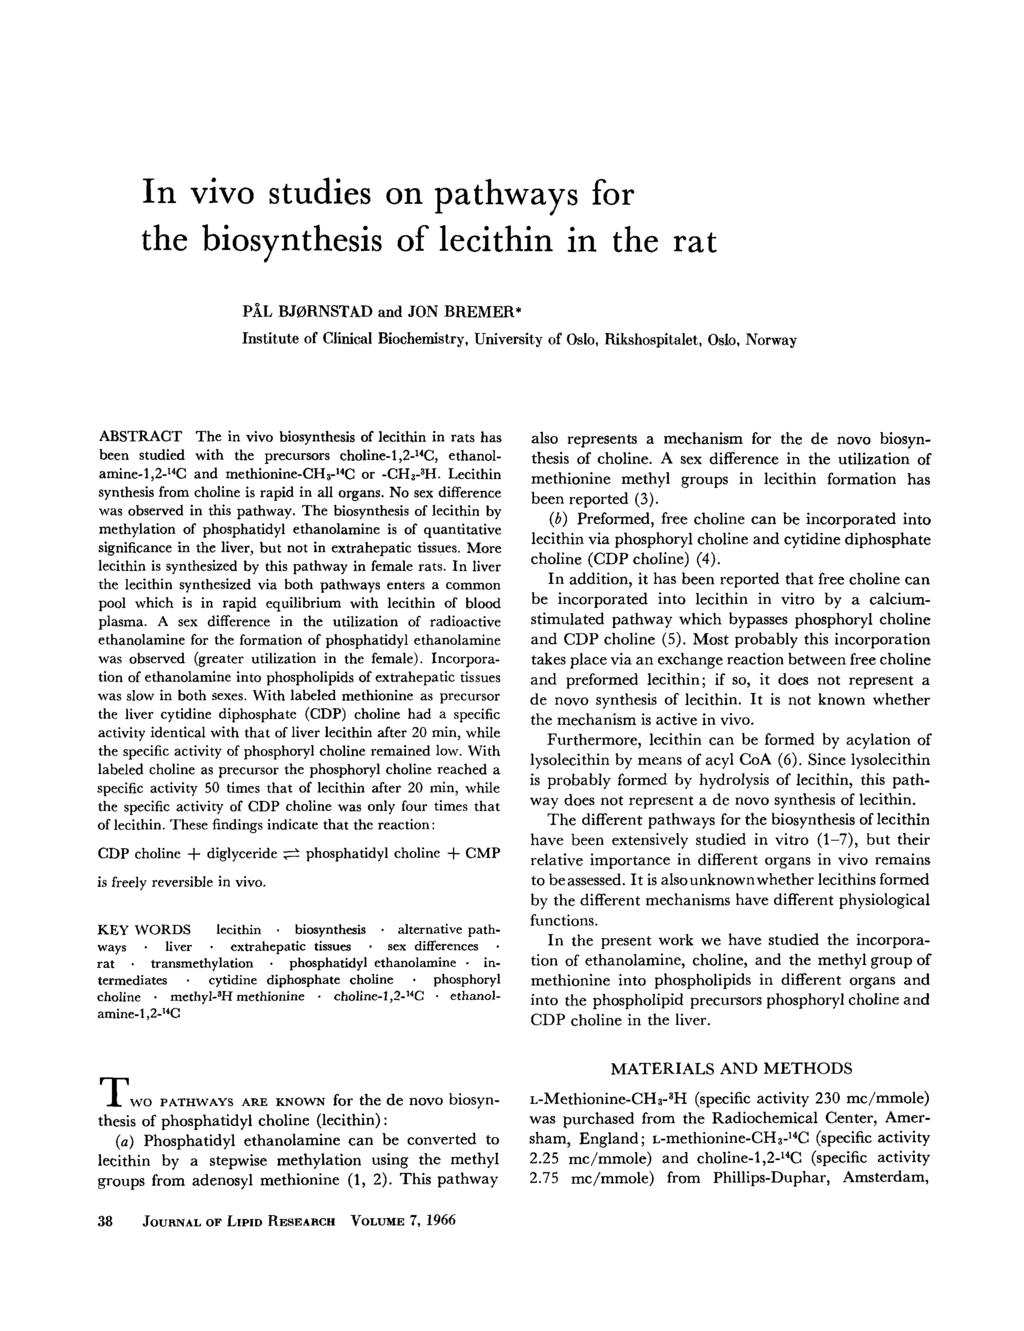 In vivo studies on pathways for the biosynthesis of lecithin in the rat PAL BJBRNSTAD and JON BREMER* Institute of Clinical Biochemistry, University of Oslo, Rikshospitalet, Oslo, Norway ABSTRACT The